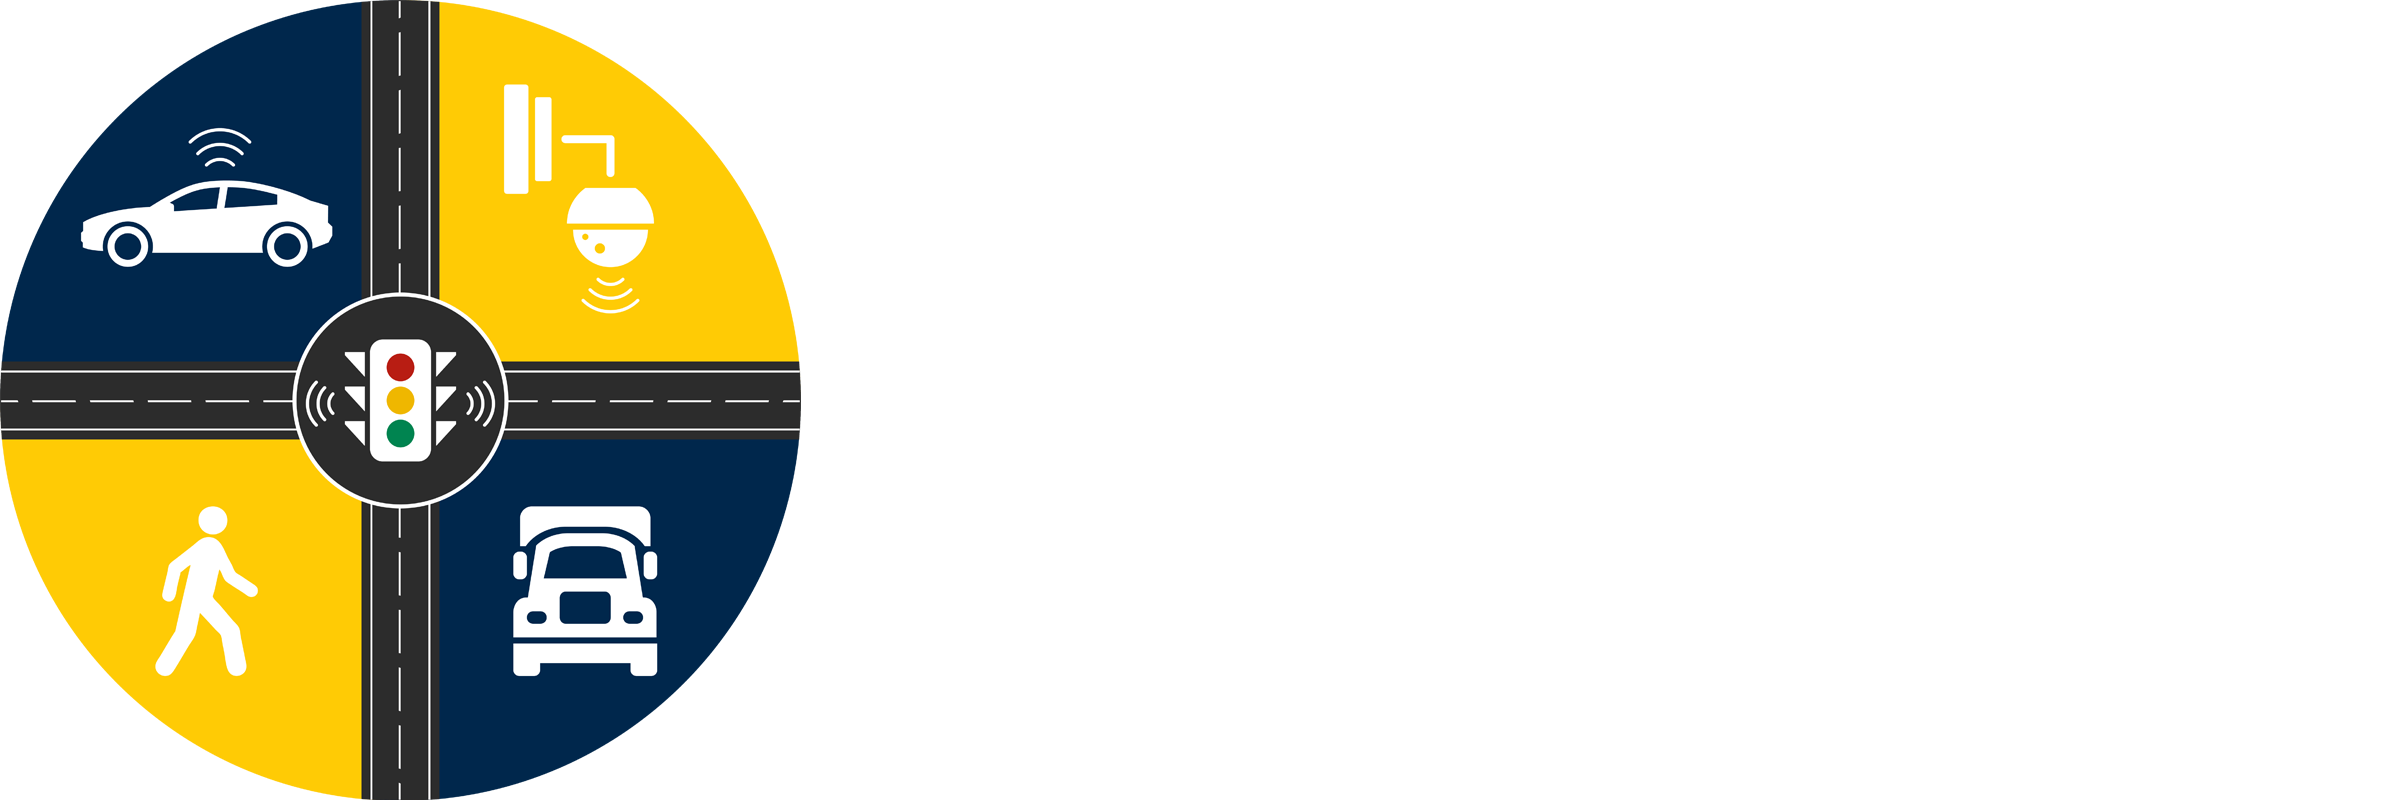 The Smart Intersections Project Logo. It features a circle divided into 4 segments by roadways. Each segment has an icon including a vehicle, a video sensor, a pedestrian, a freight vehicle, and in the middle, a traffic signal.